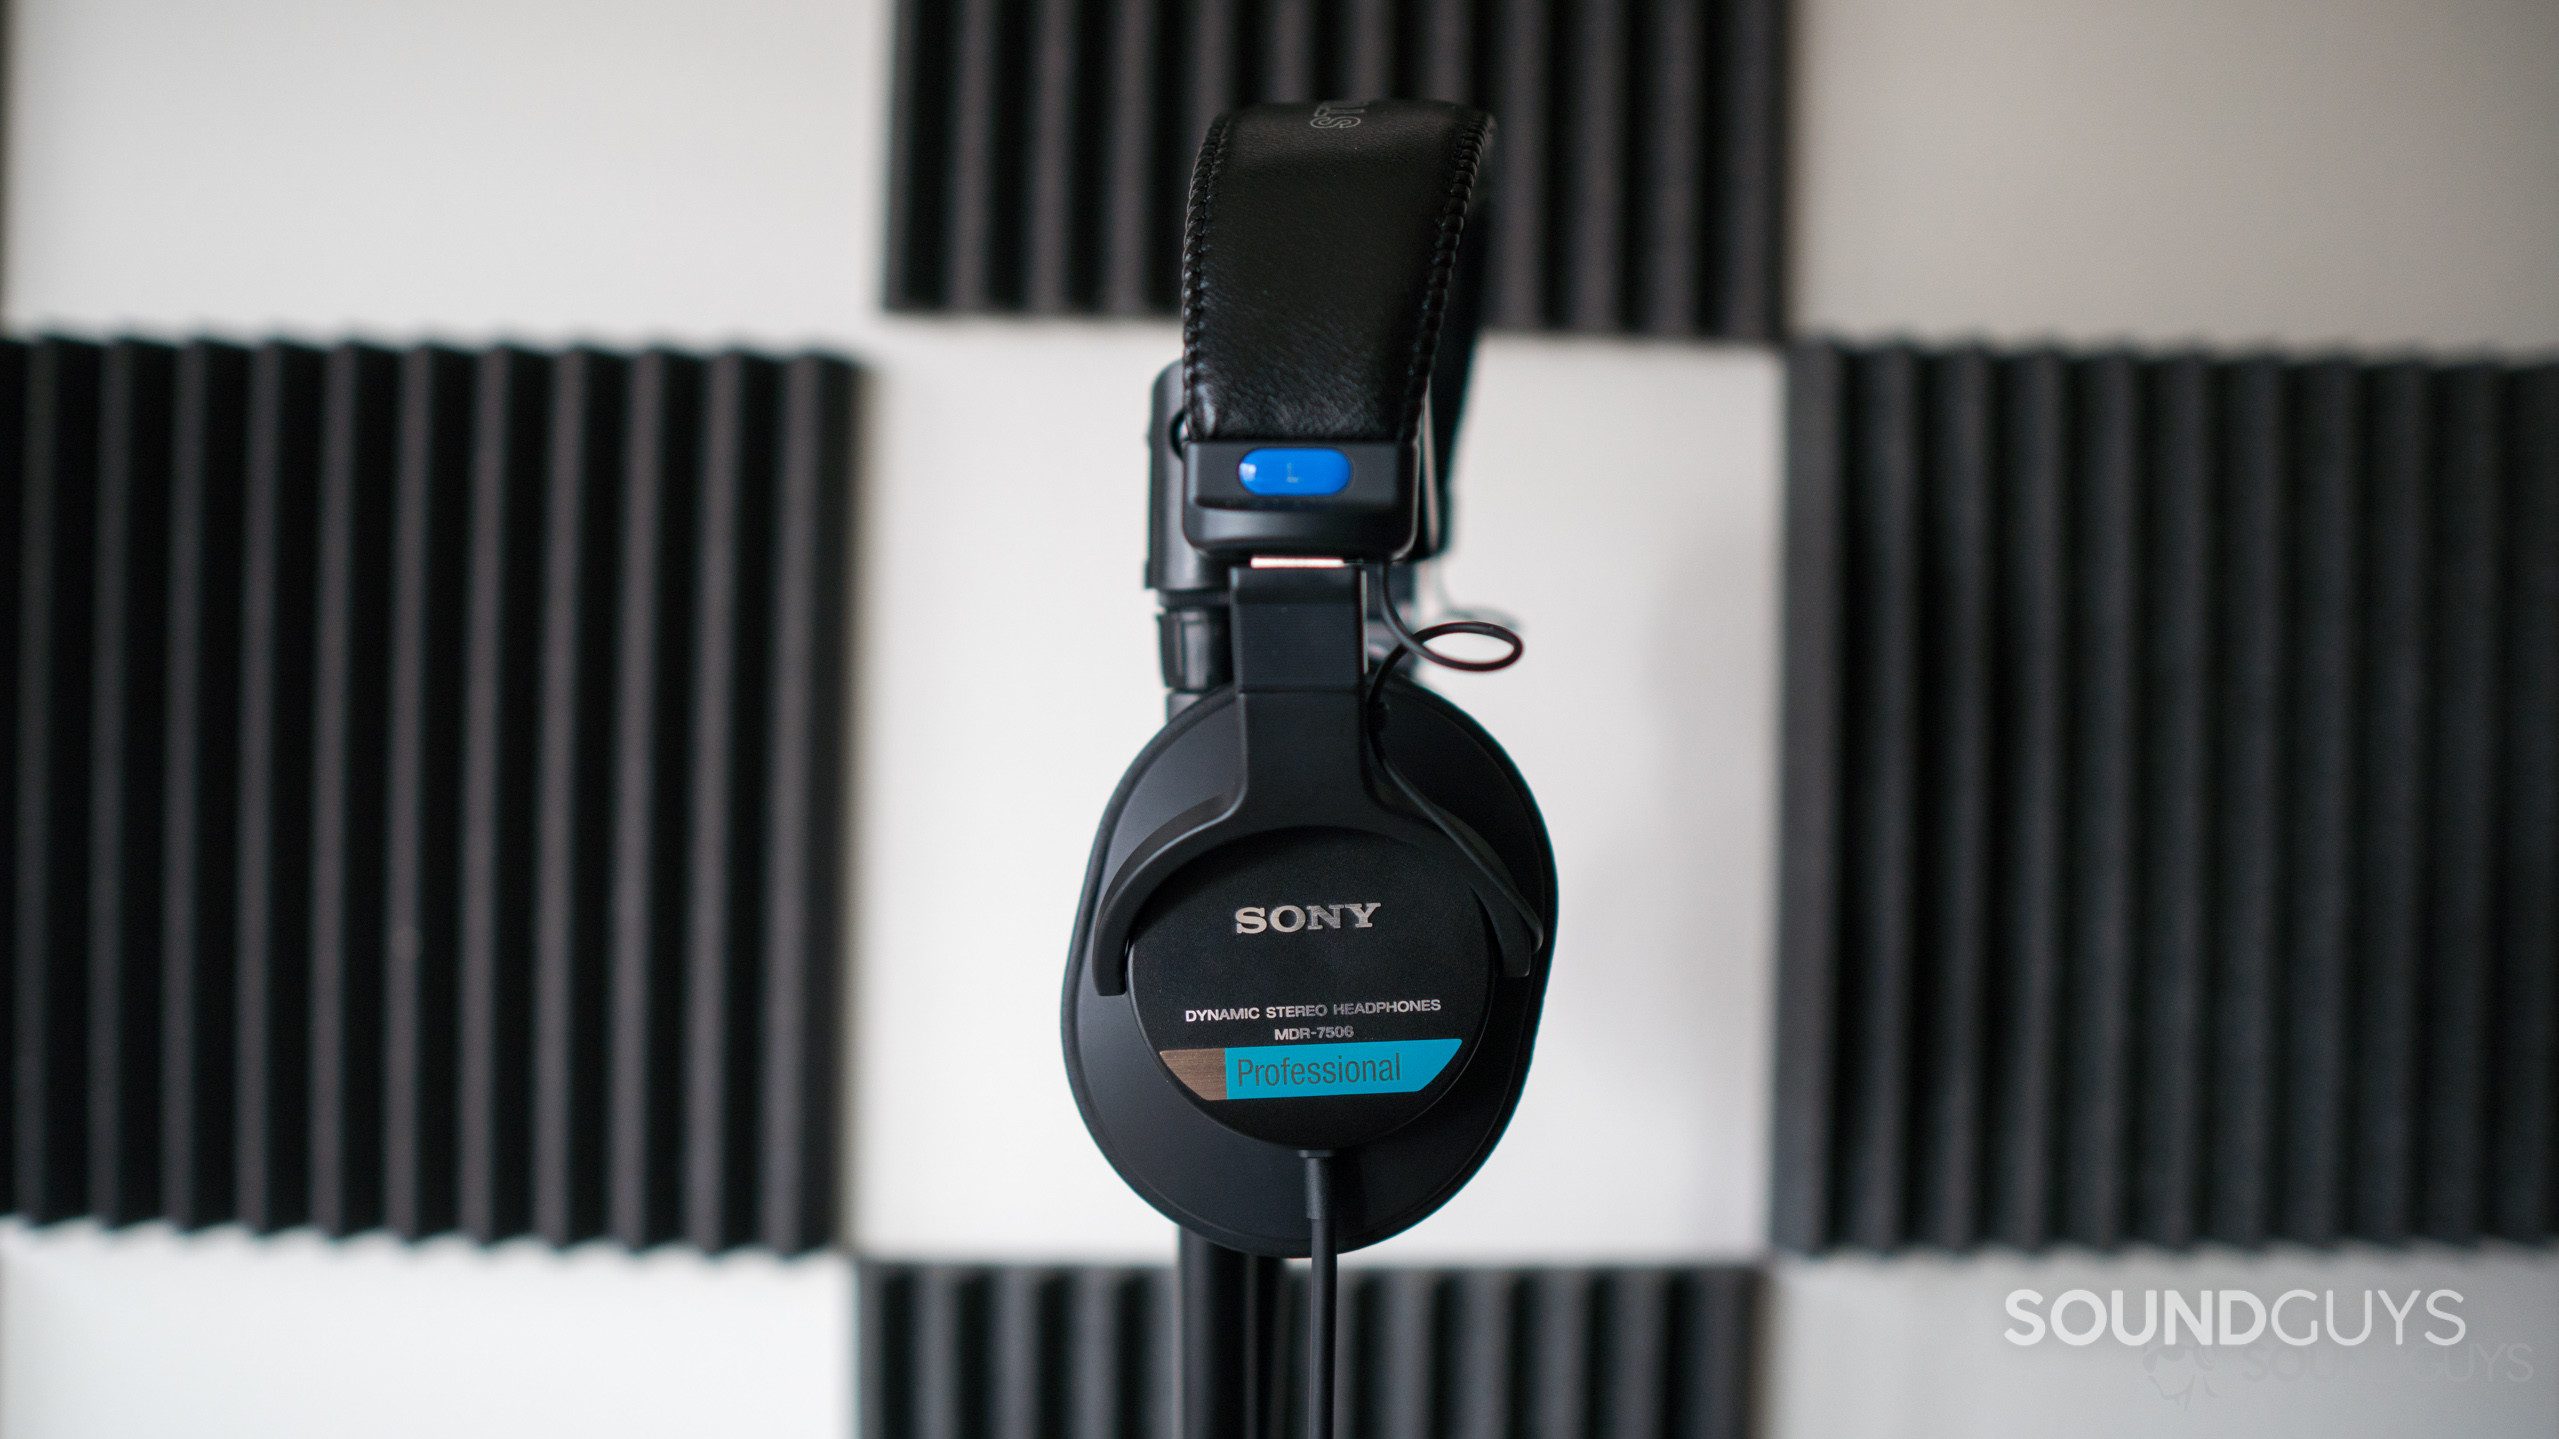 Either side has the letters L or R so you know which is which on the Sony MDR-7506 studio headphones.